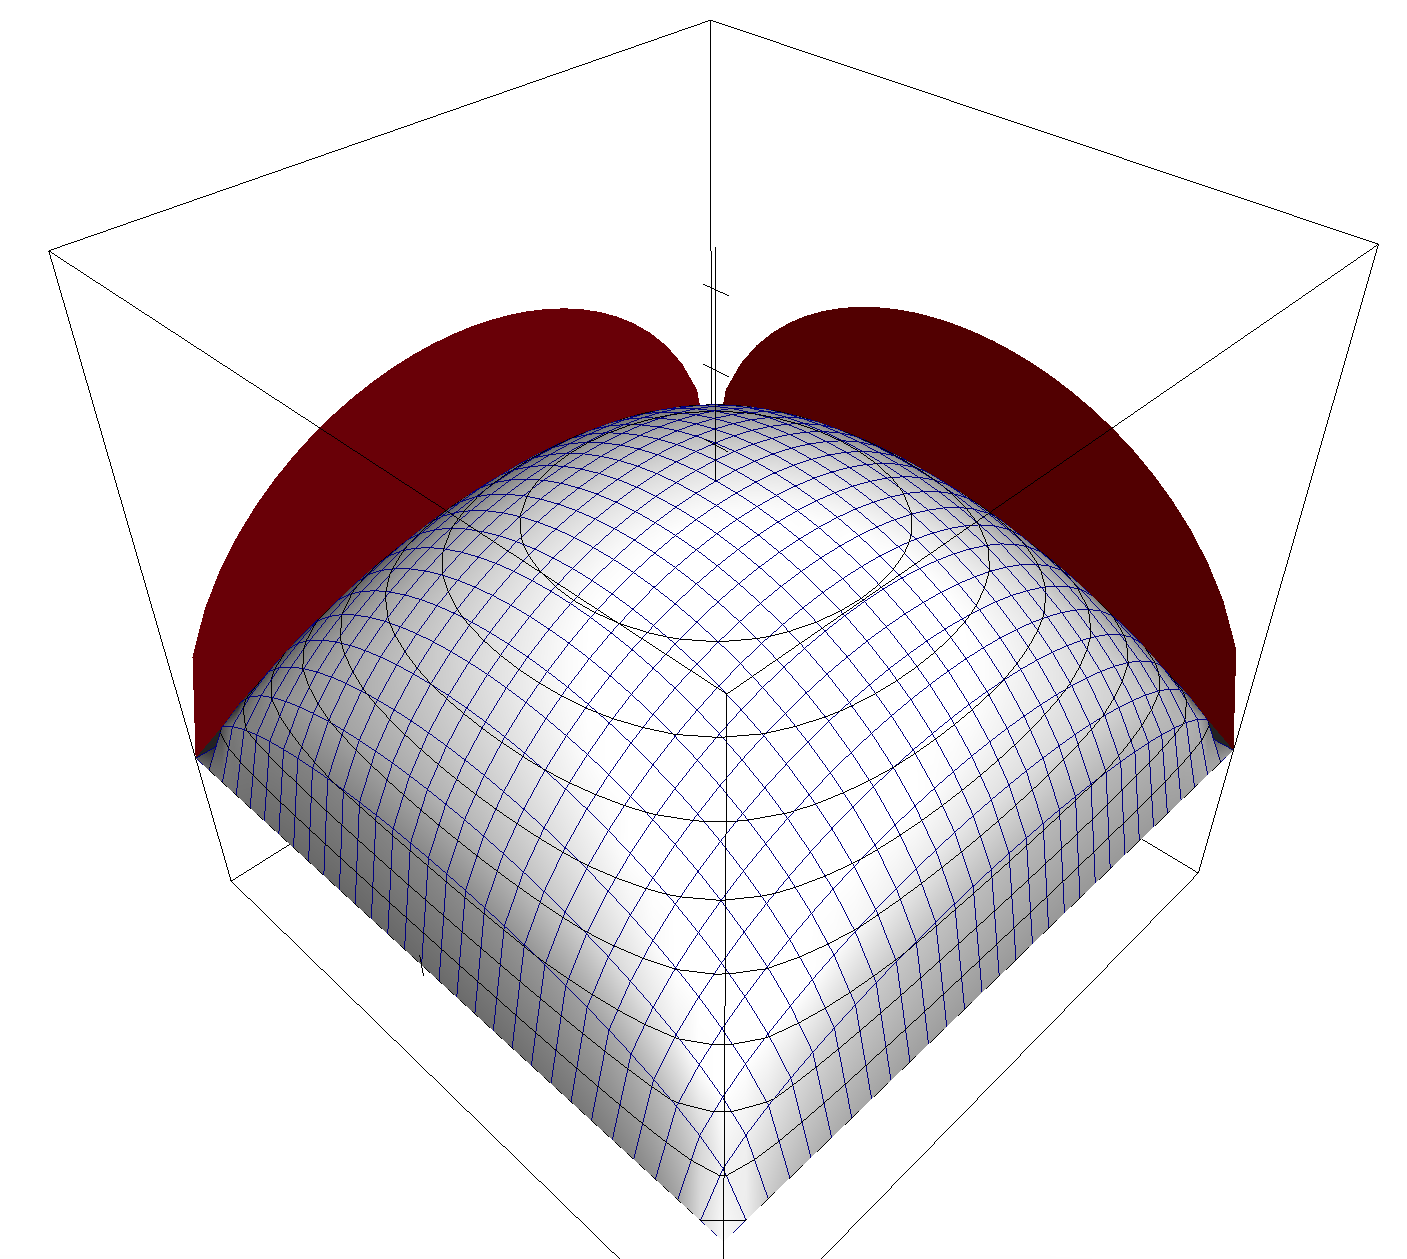 A 3d chart showing a quadratic along the x and y axes, forming a boxy hill along the z-axis.